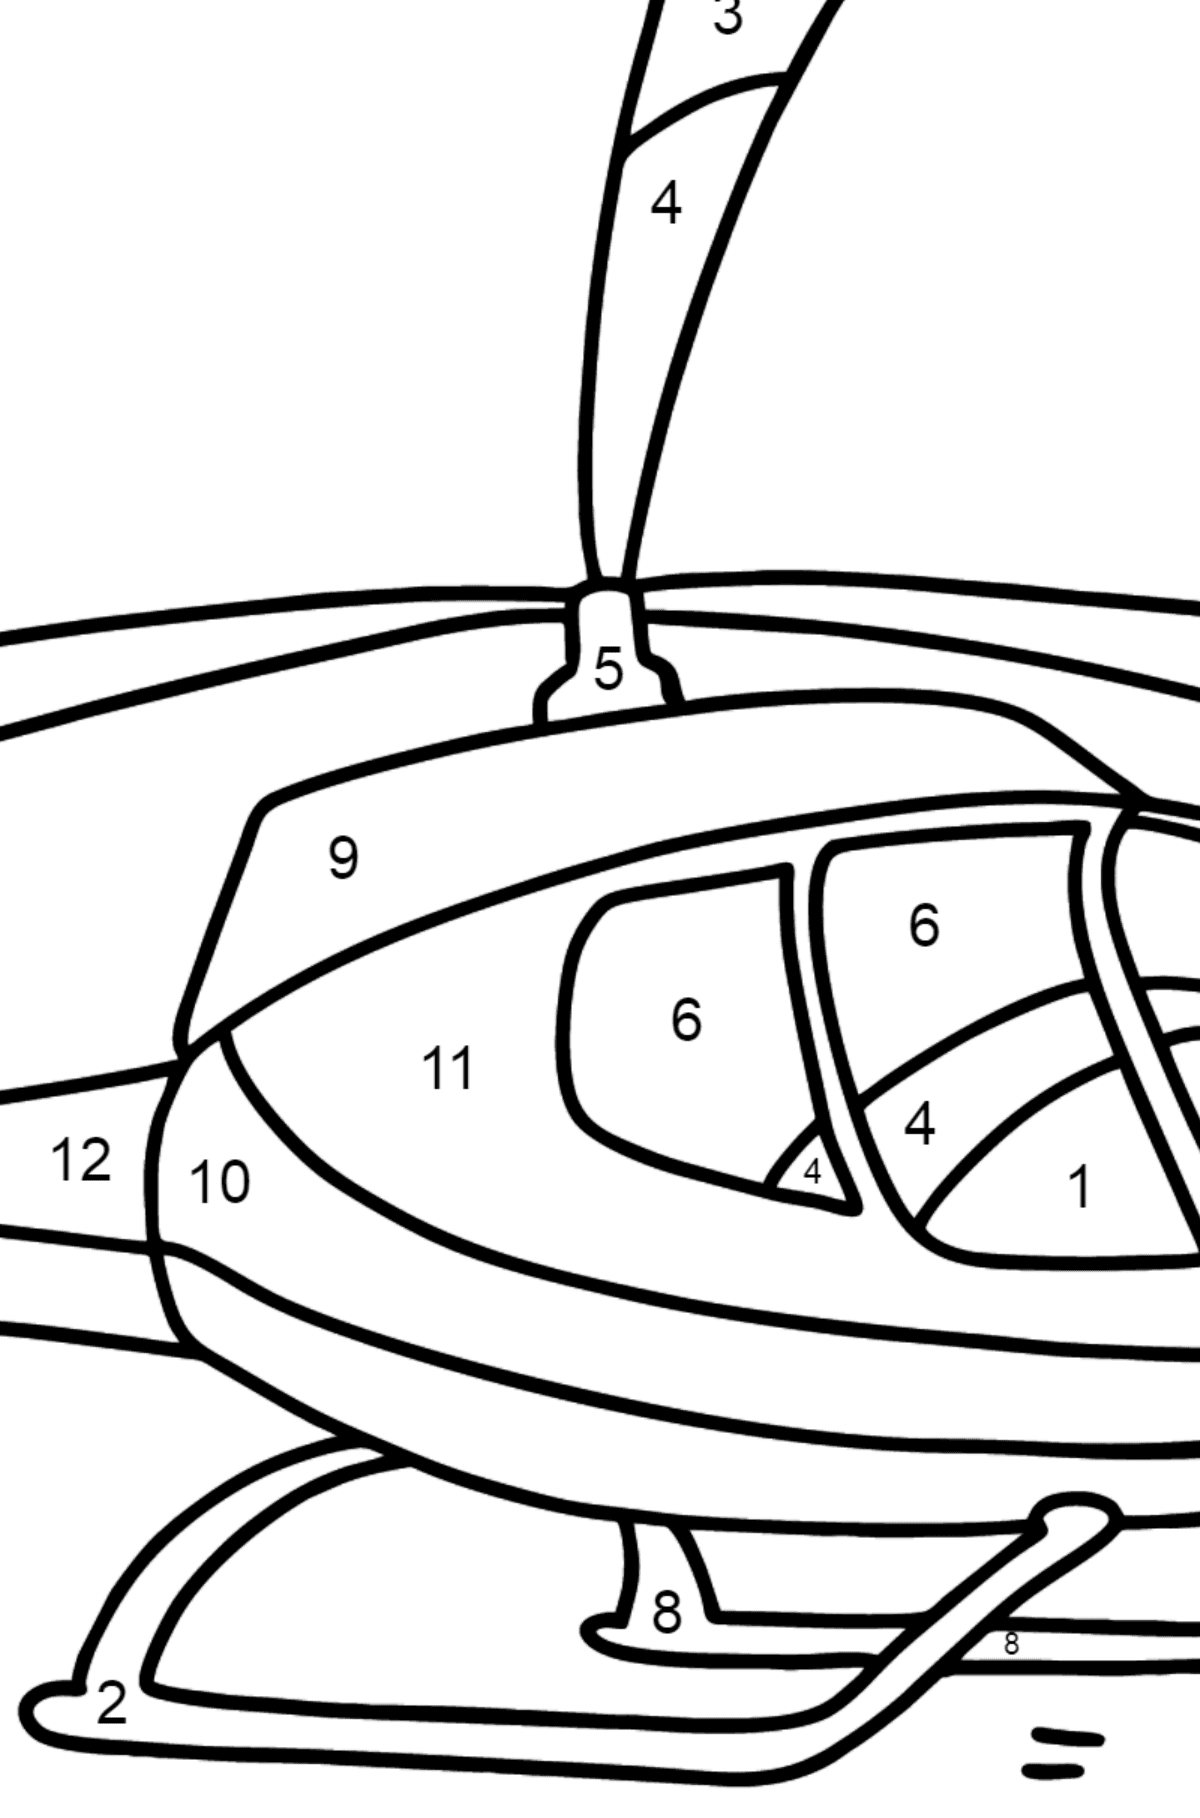 Beautiful Helicopter coloring page - Coloring by Numbers for Kids